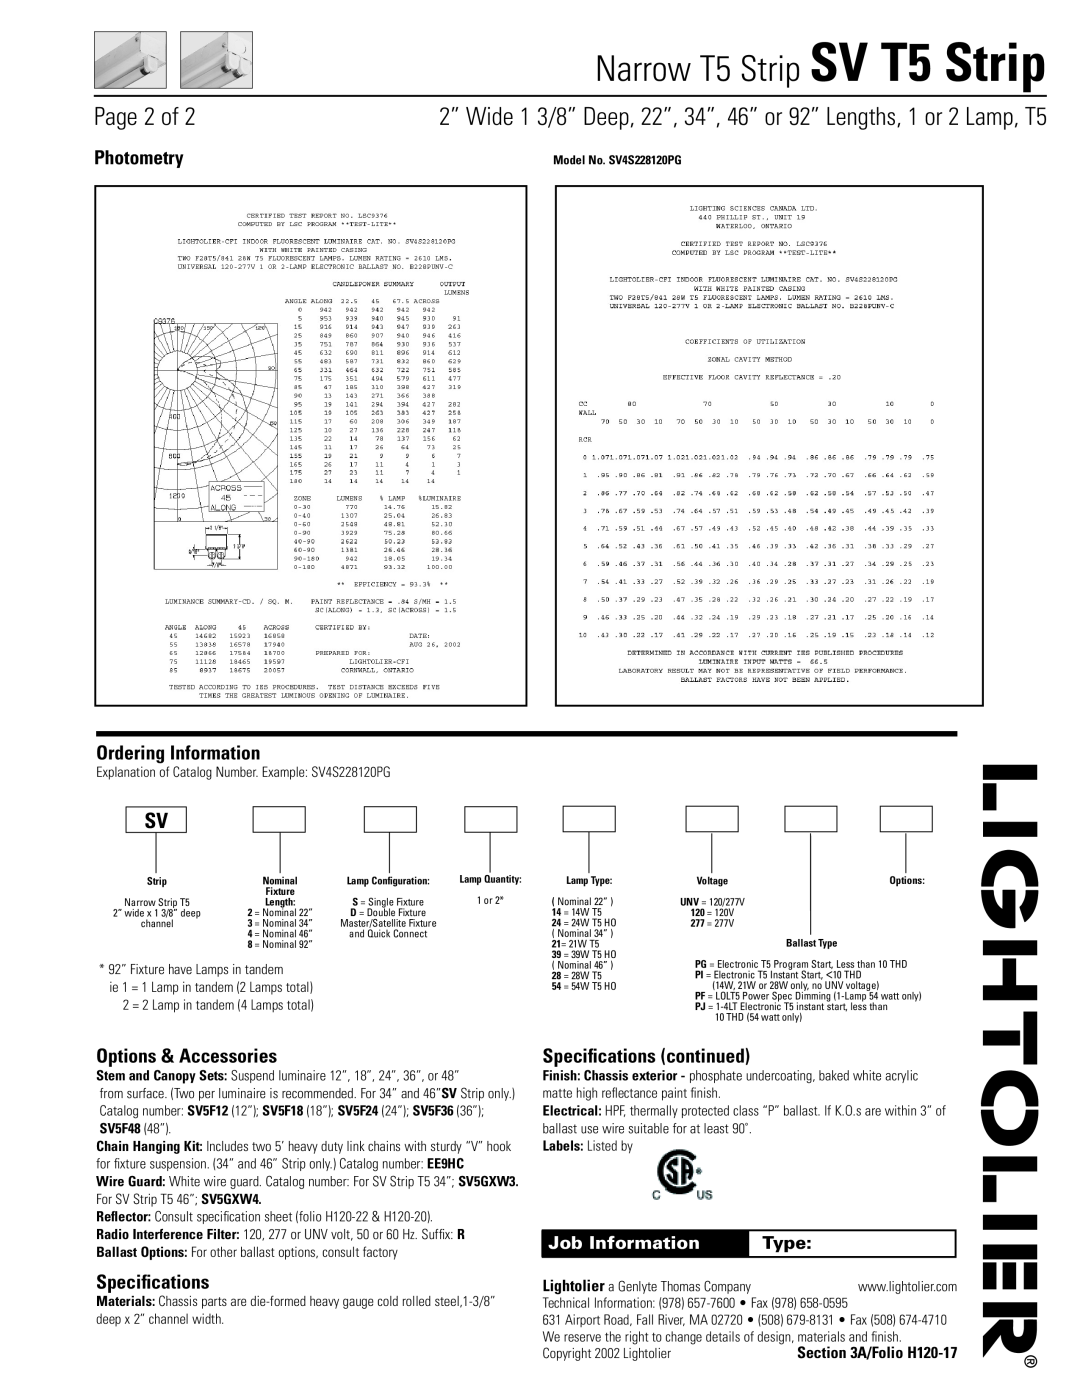 Lightolier SV T5 STRIP Page 2 of, Photometry, Ordering Information, Options & Accessories, Speciﬁcations, Job Information 